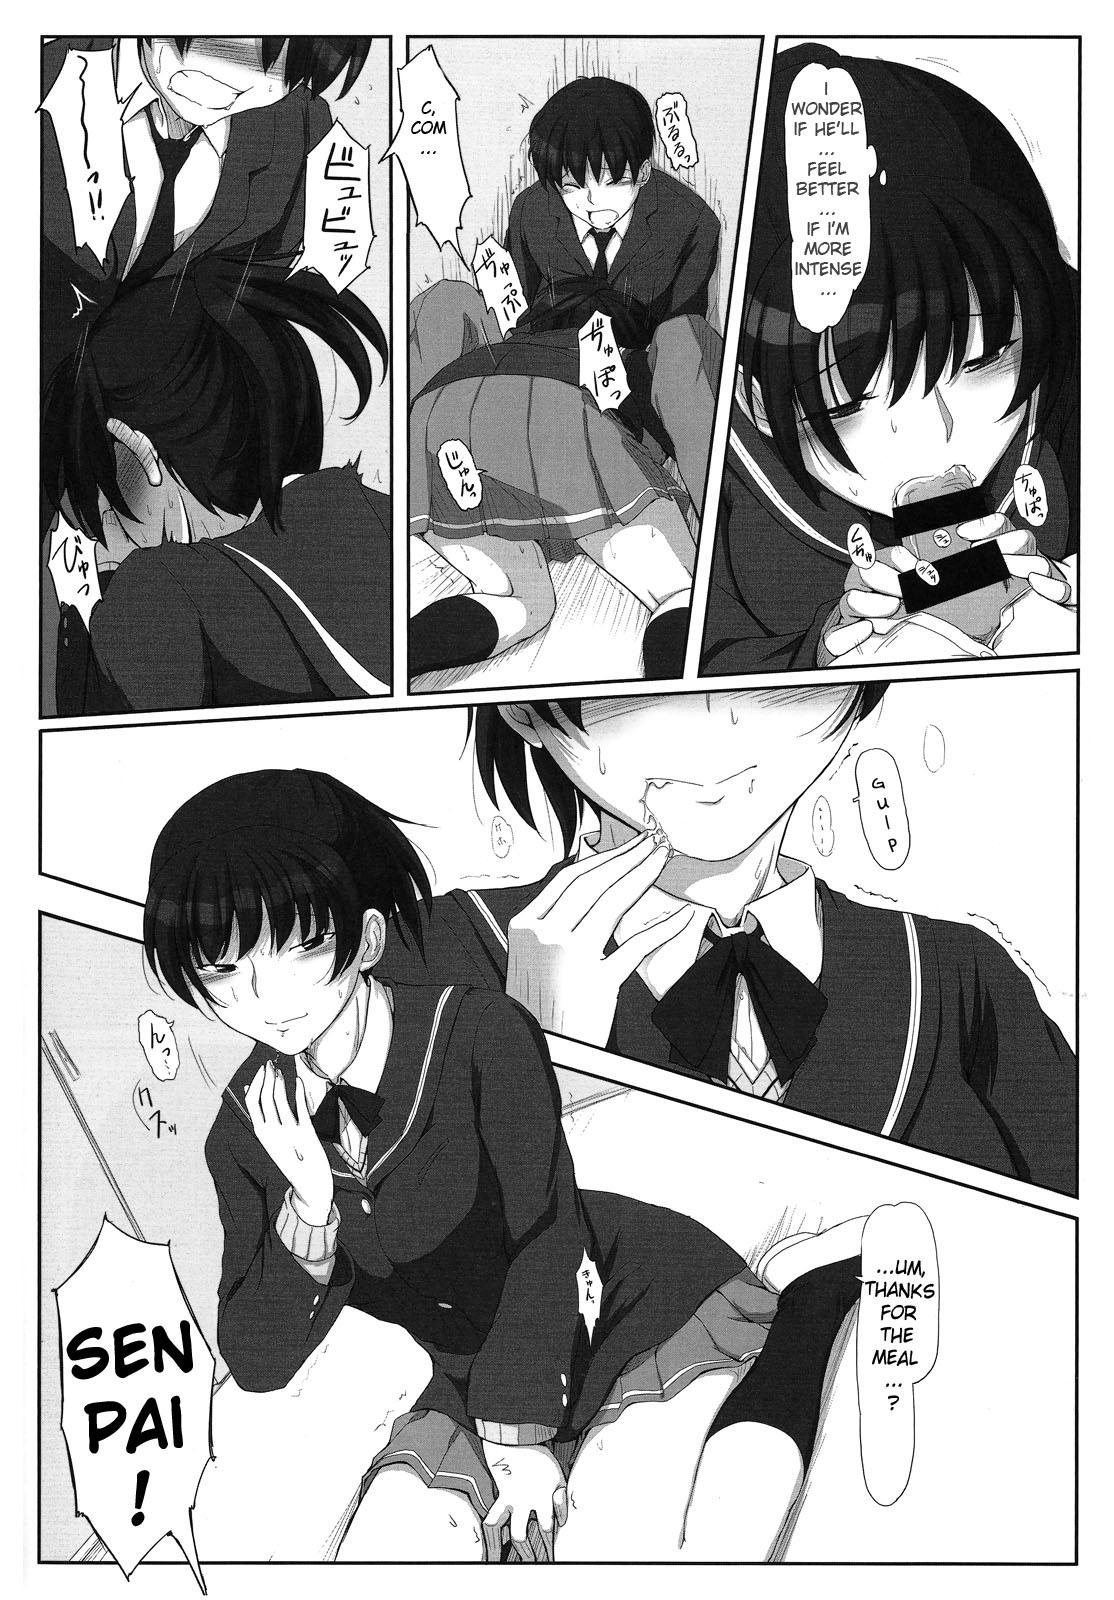 From Mikkai 4 - Secret Assignation 4 - Amagami Foot Job - Page 3